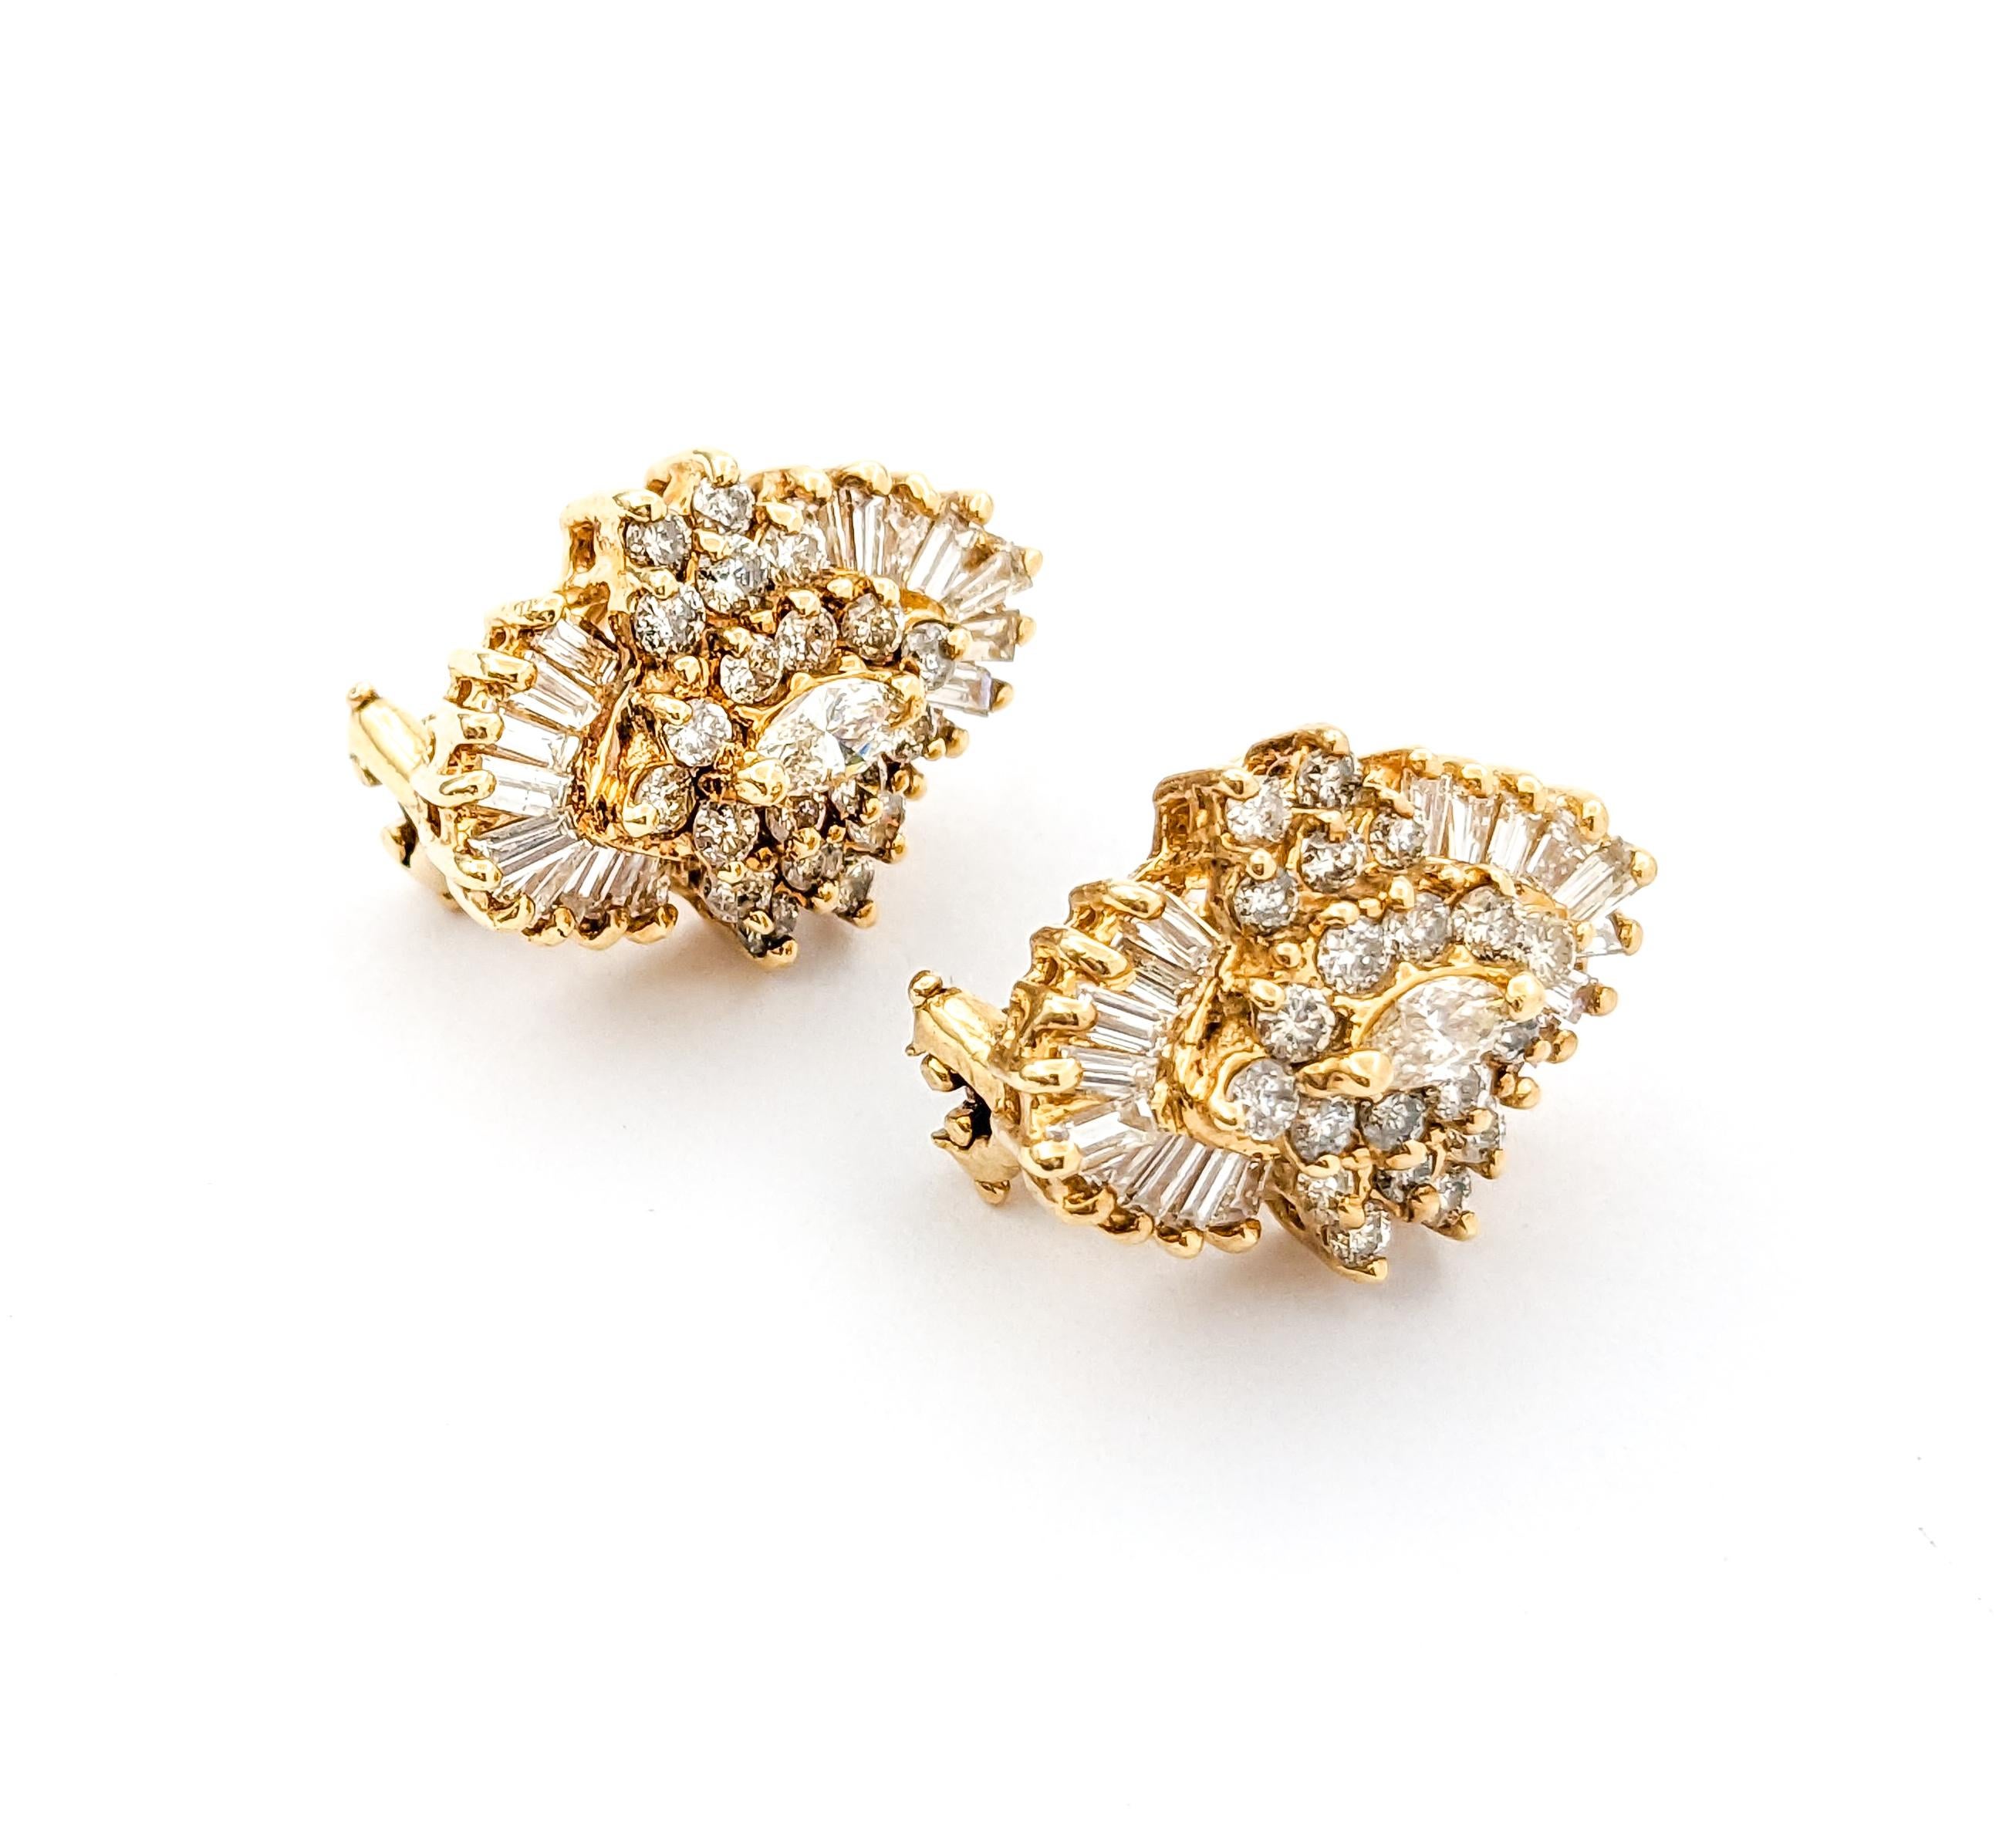 Vintage Diamond Cluster Earrings In Yellow Gold In Excellent Condition For Sale In Bloomington, MN